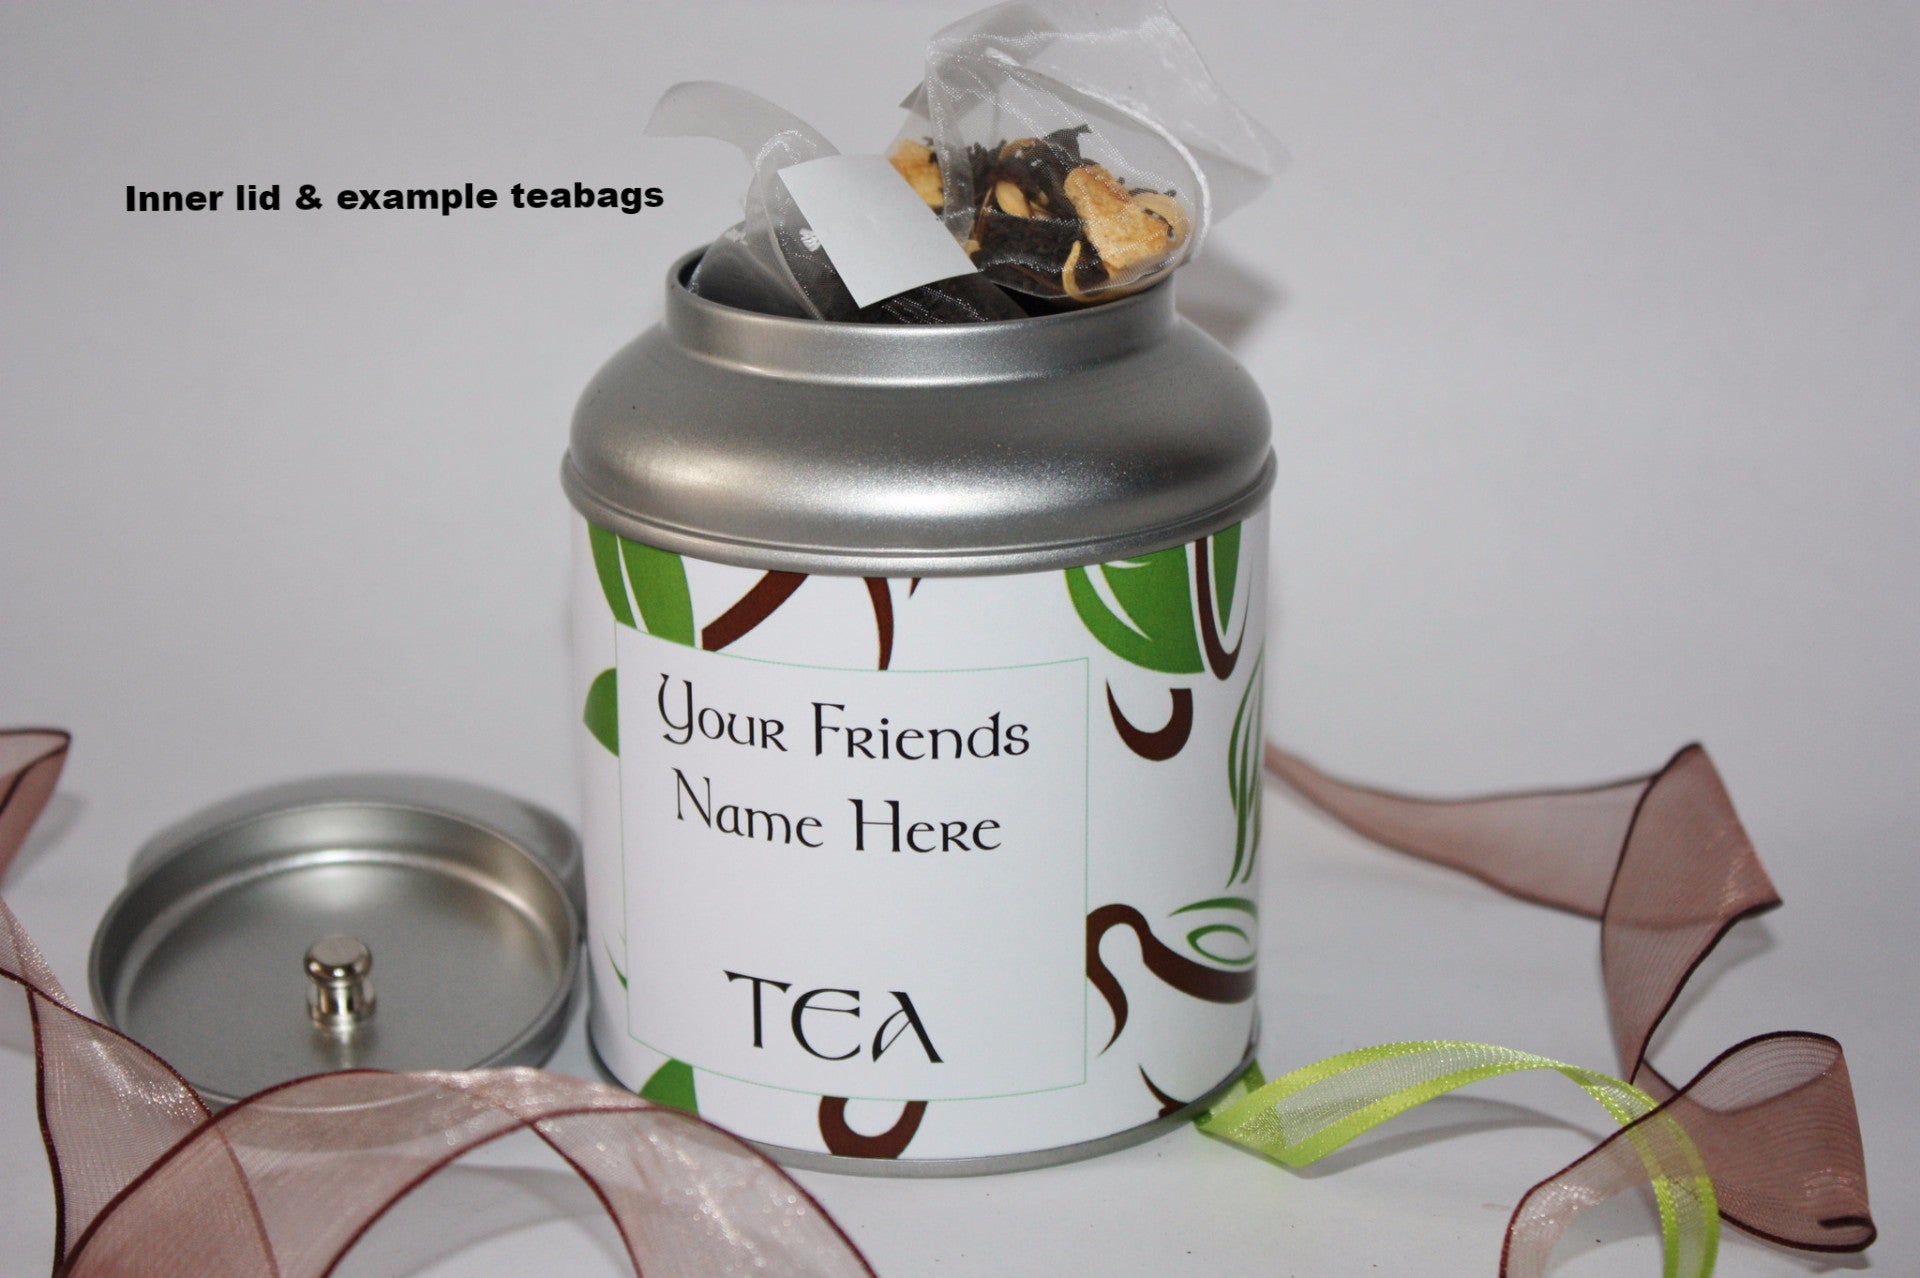 Personalised Tea Gift - Filled with 18 Pyramid Teabags - Choice of 2 tea blends and 13 designs